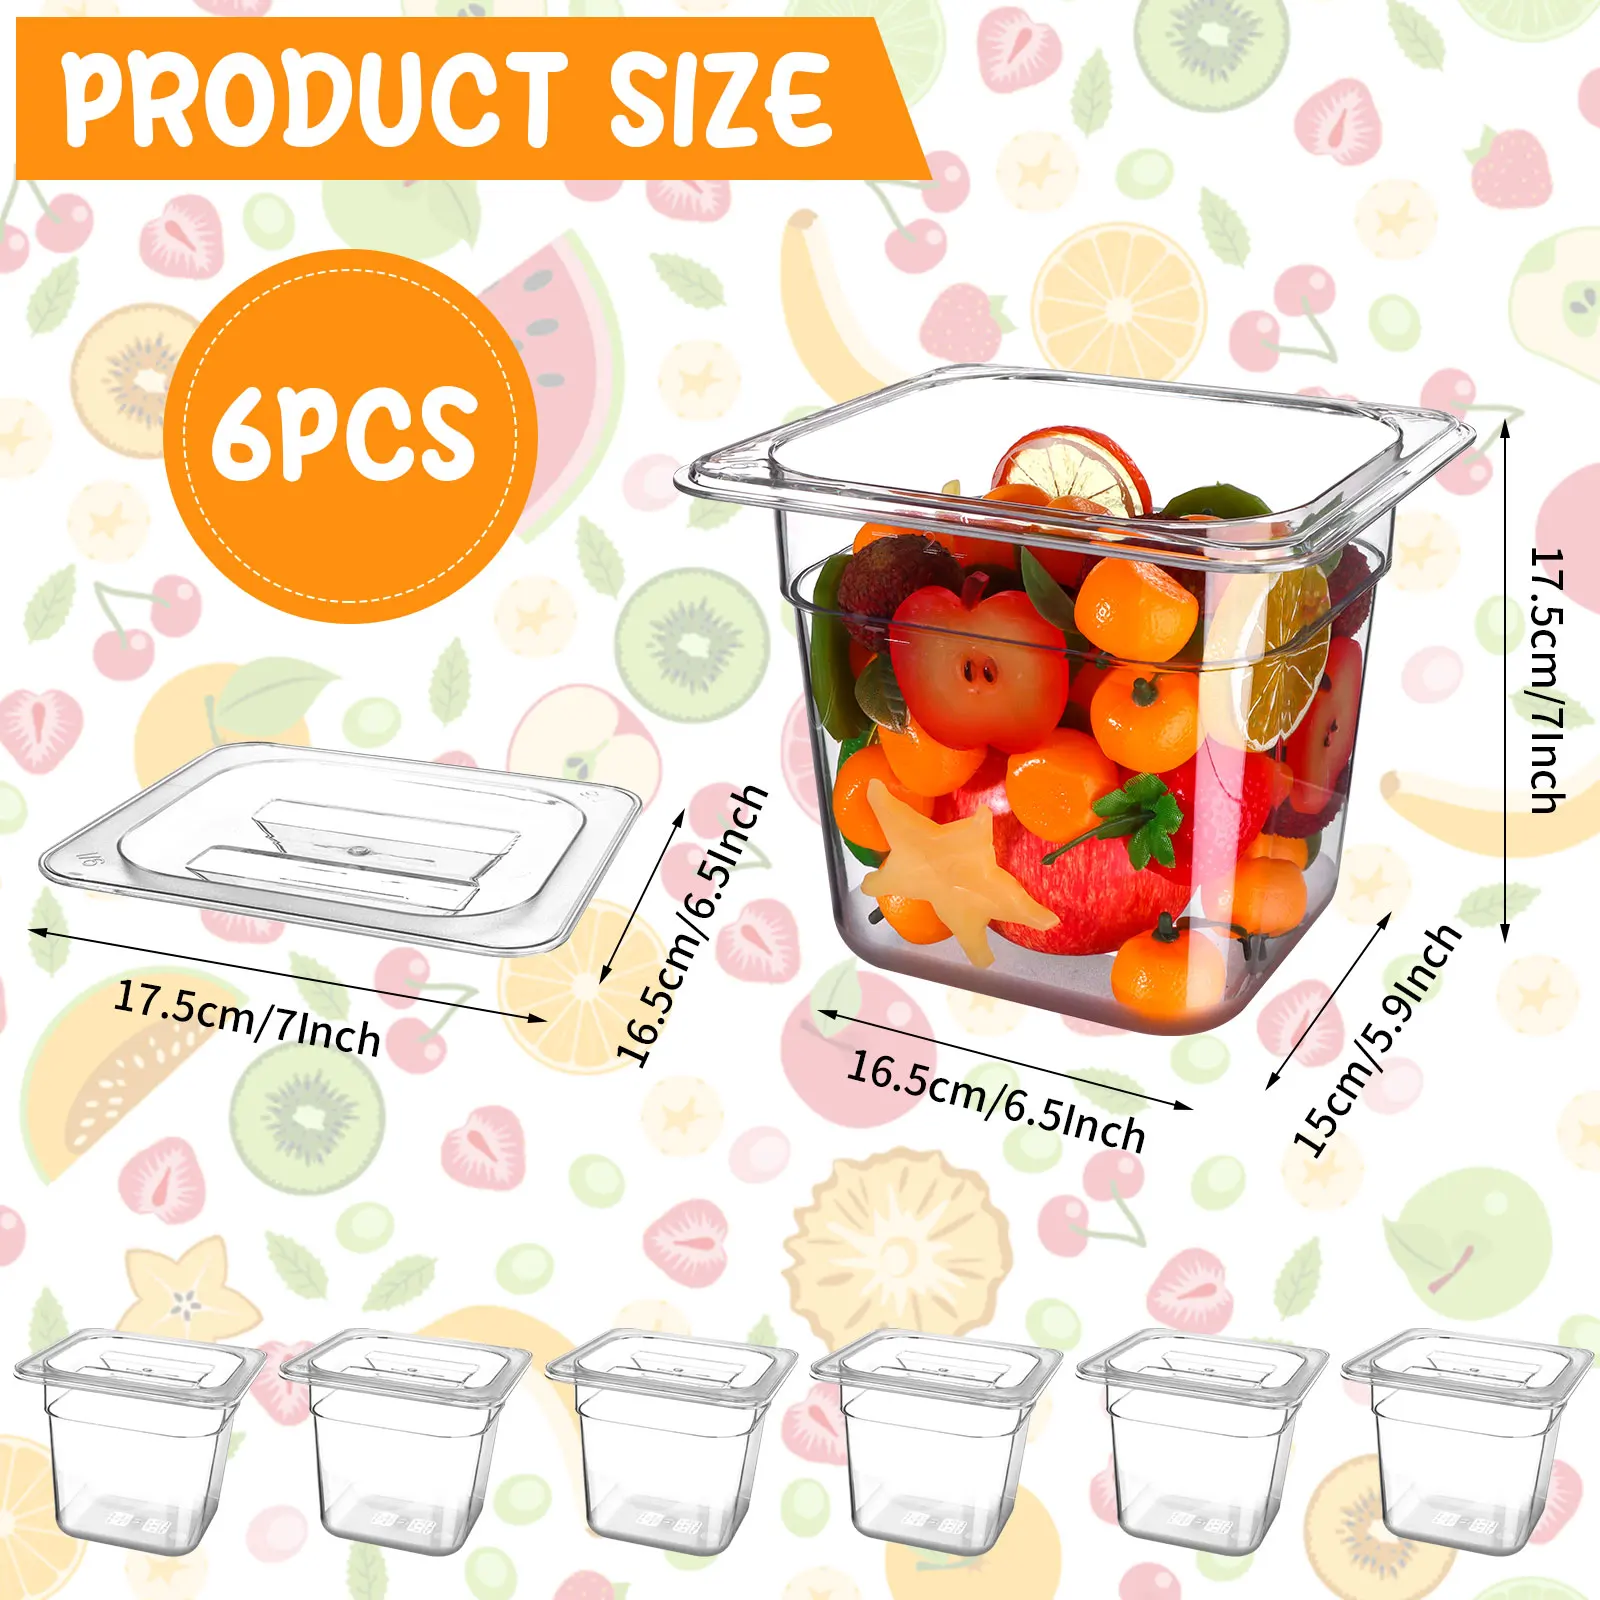 https://ae01.alicdn.com/kf/S21cb8fafa343436b903491bad392166du/6-Pack-Plastic-Pan-With-Lid-1-6-Inch-Deep-Stackable-Acrylic-Square-Container.jpg